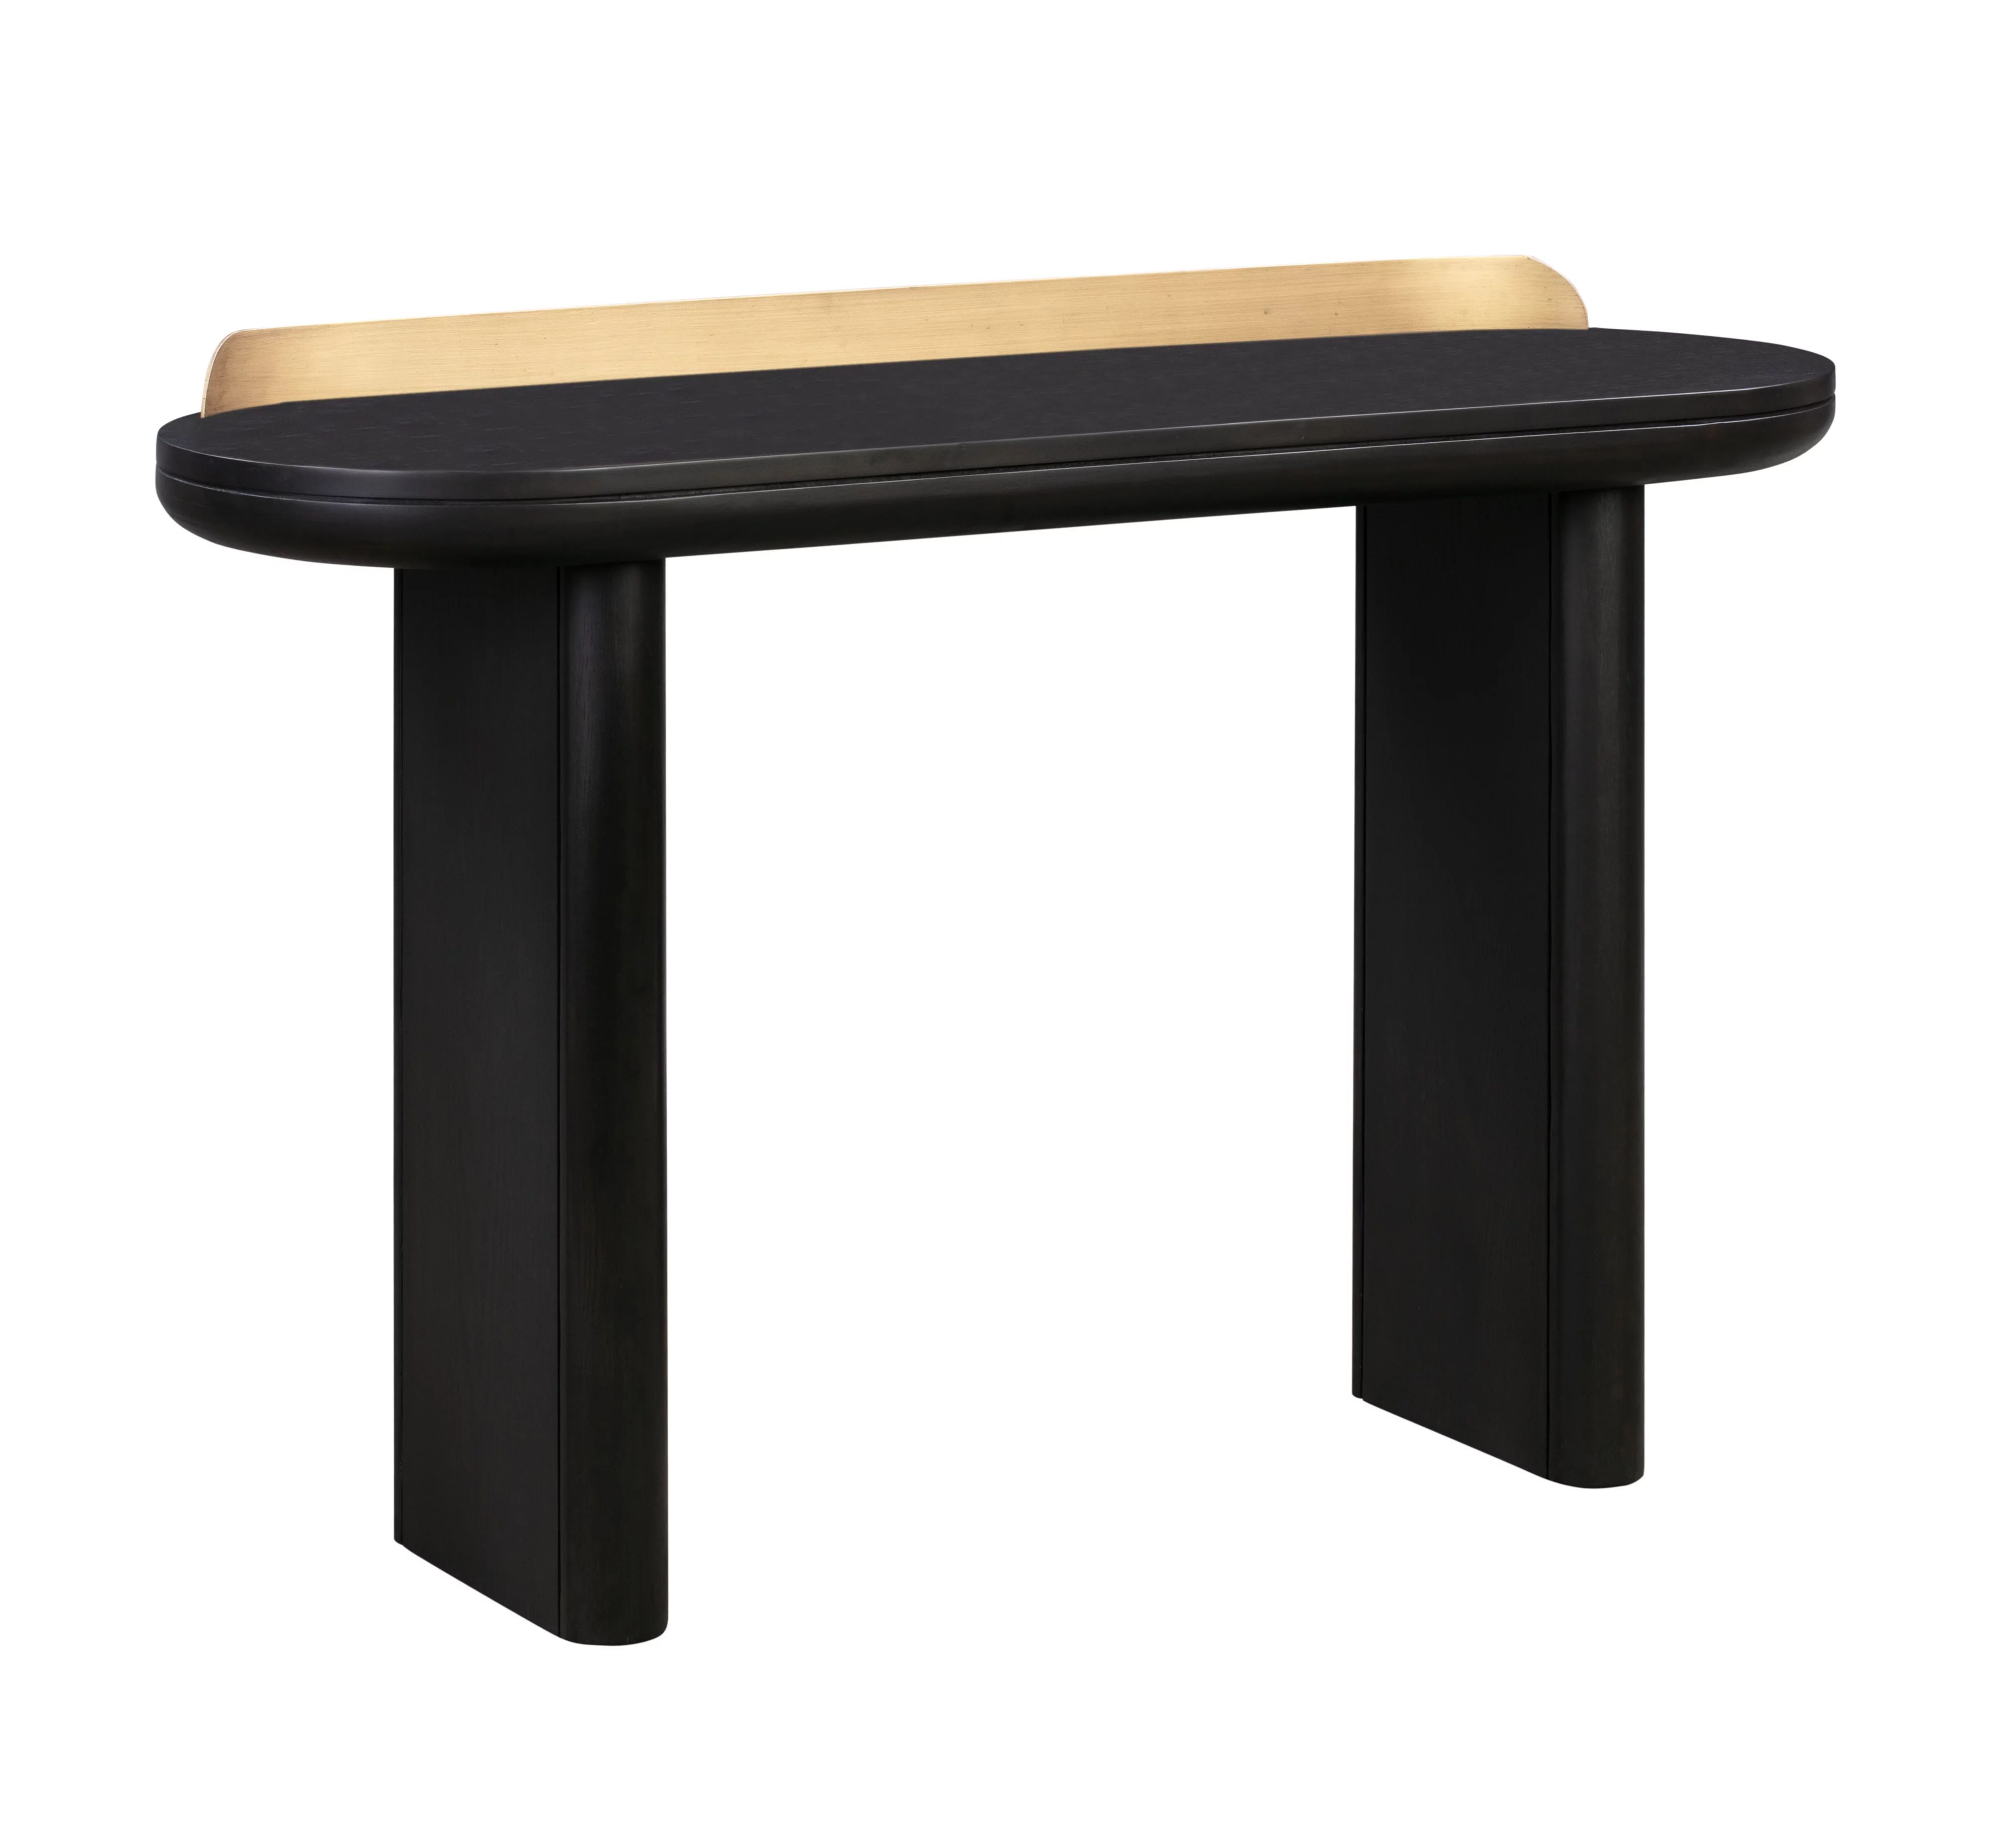 TOV Furniture Braden Black Acacia Wood Desk/Console Table With Brass Accent | Walmart (US)